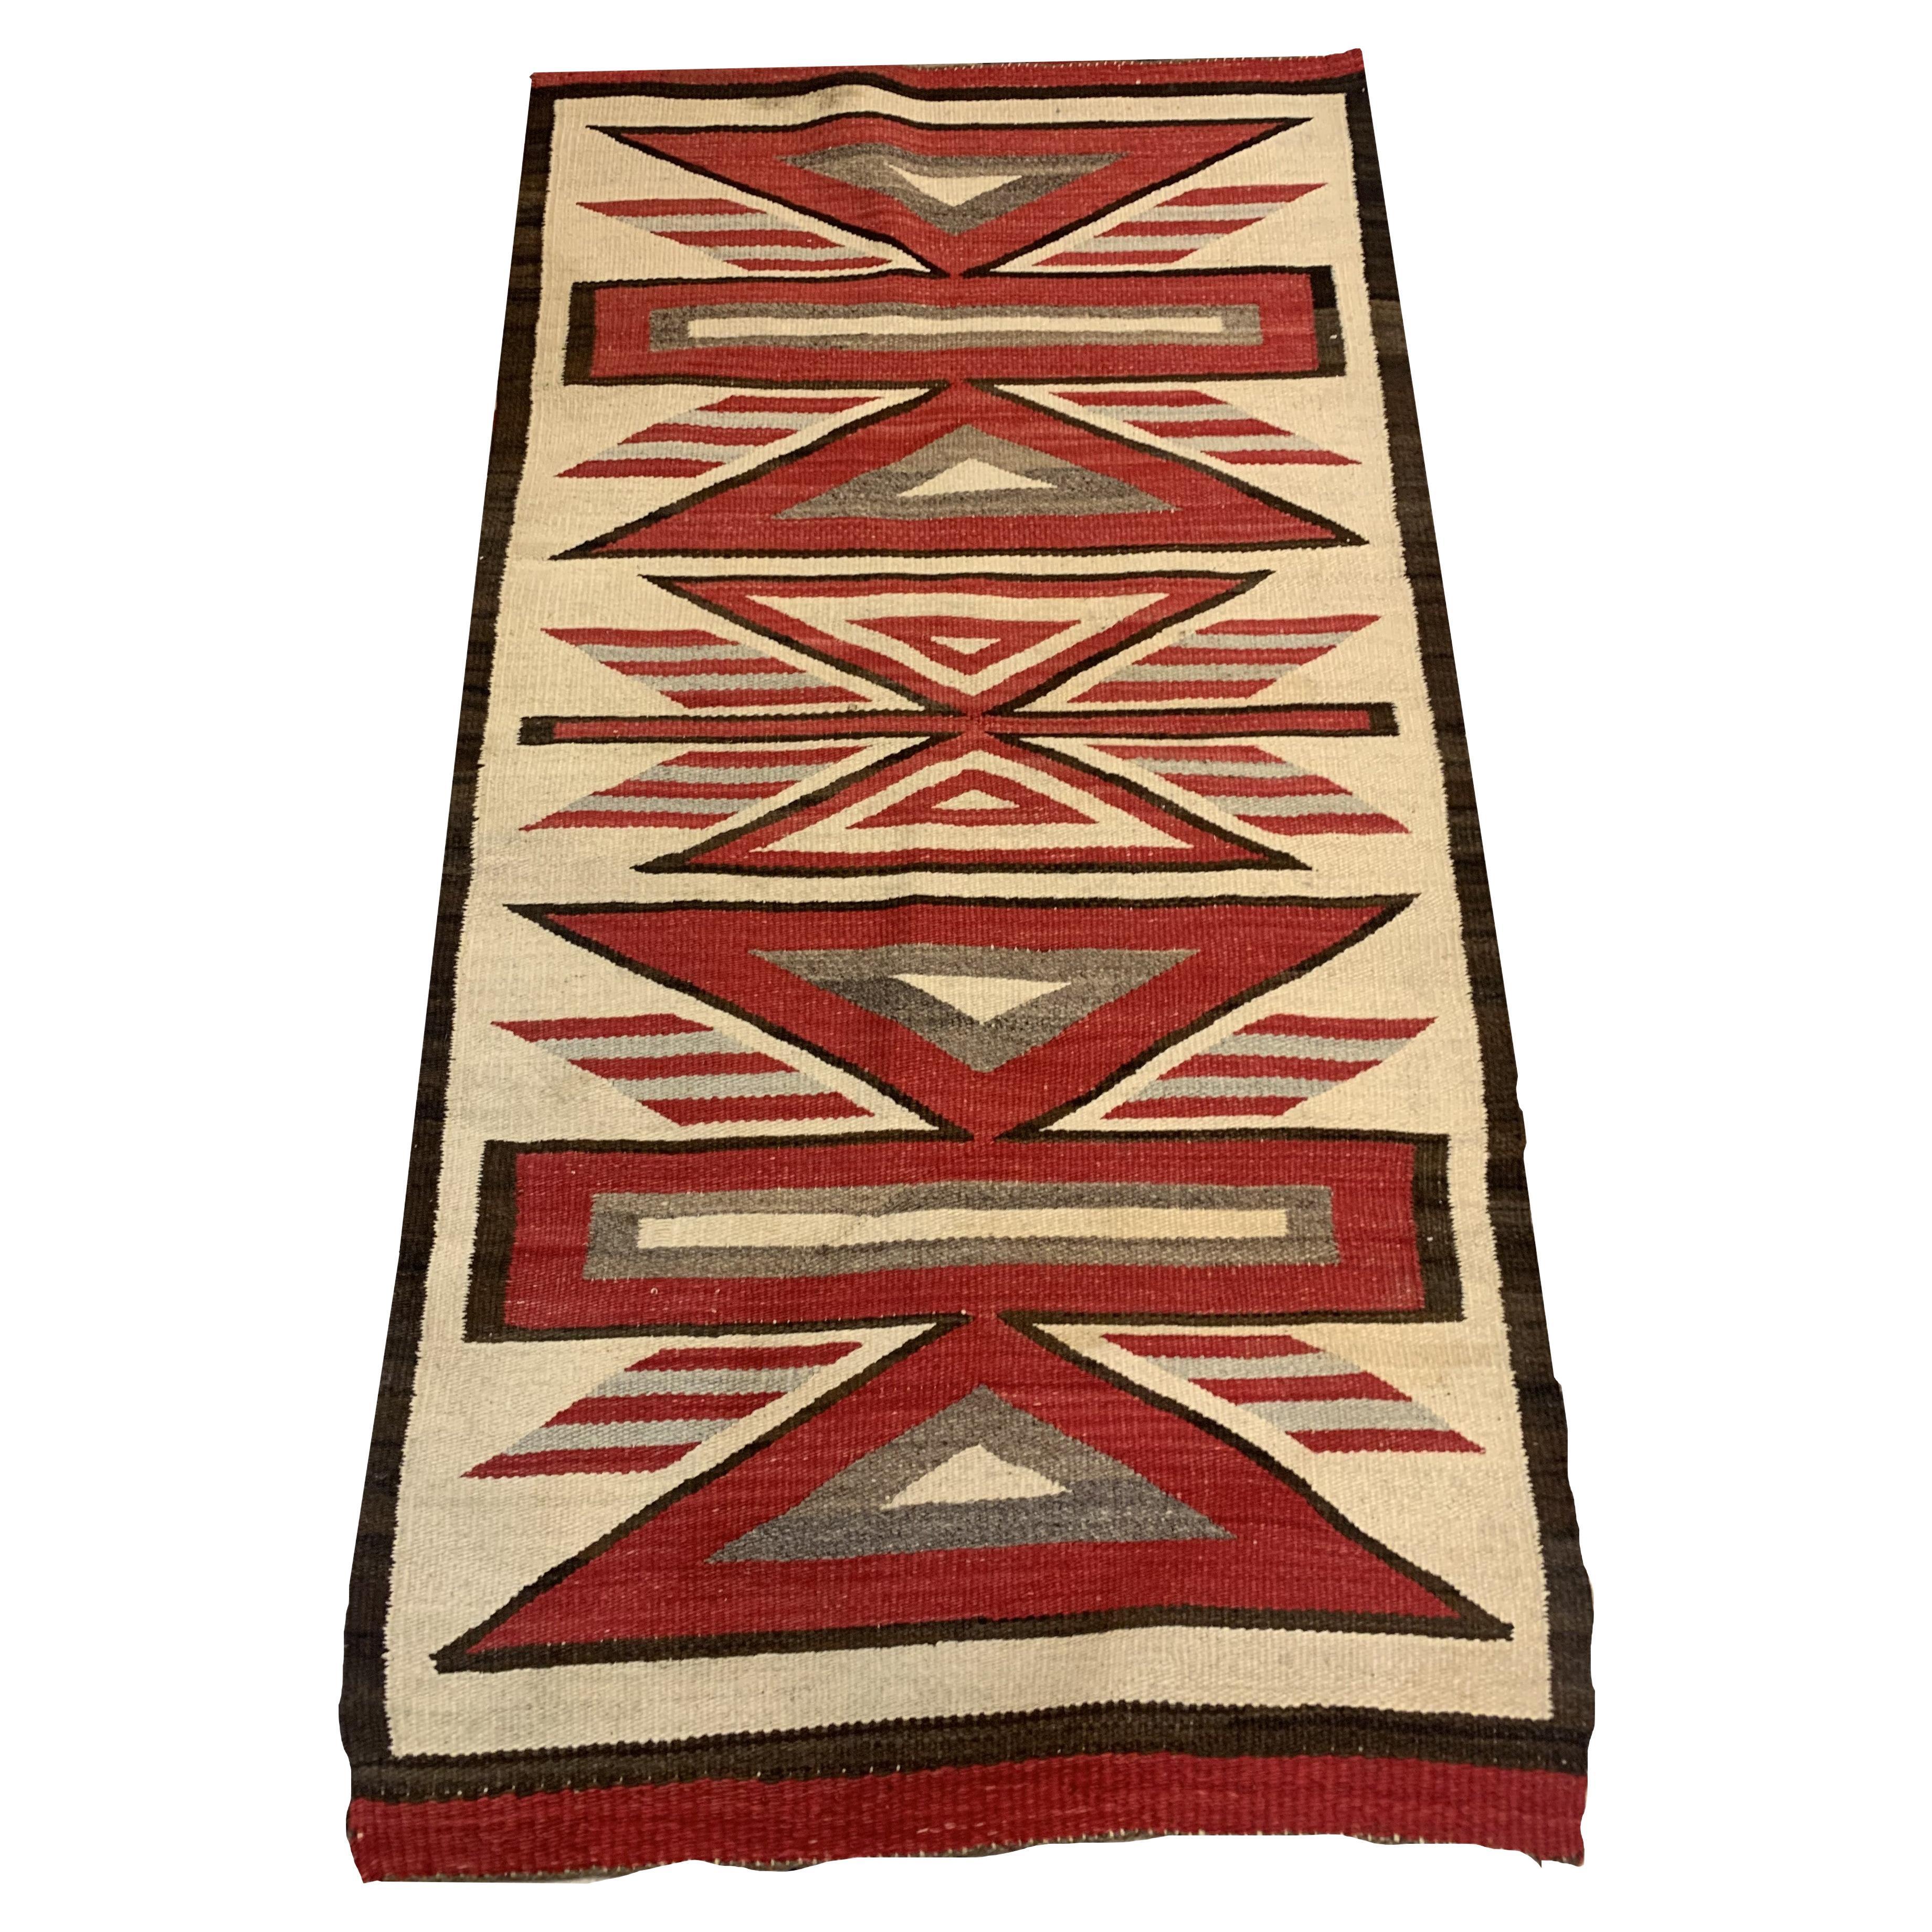 Introducing our Handmade Antique Native American Navajo Rug, a captivating piece steeped in history. Measuring 2.10’ x 5.2’ (89cm x 158cm), this rug from the early 1900s is in good condition, crafted from wool.

Colors & Design: The rug showcases a